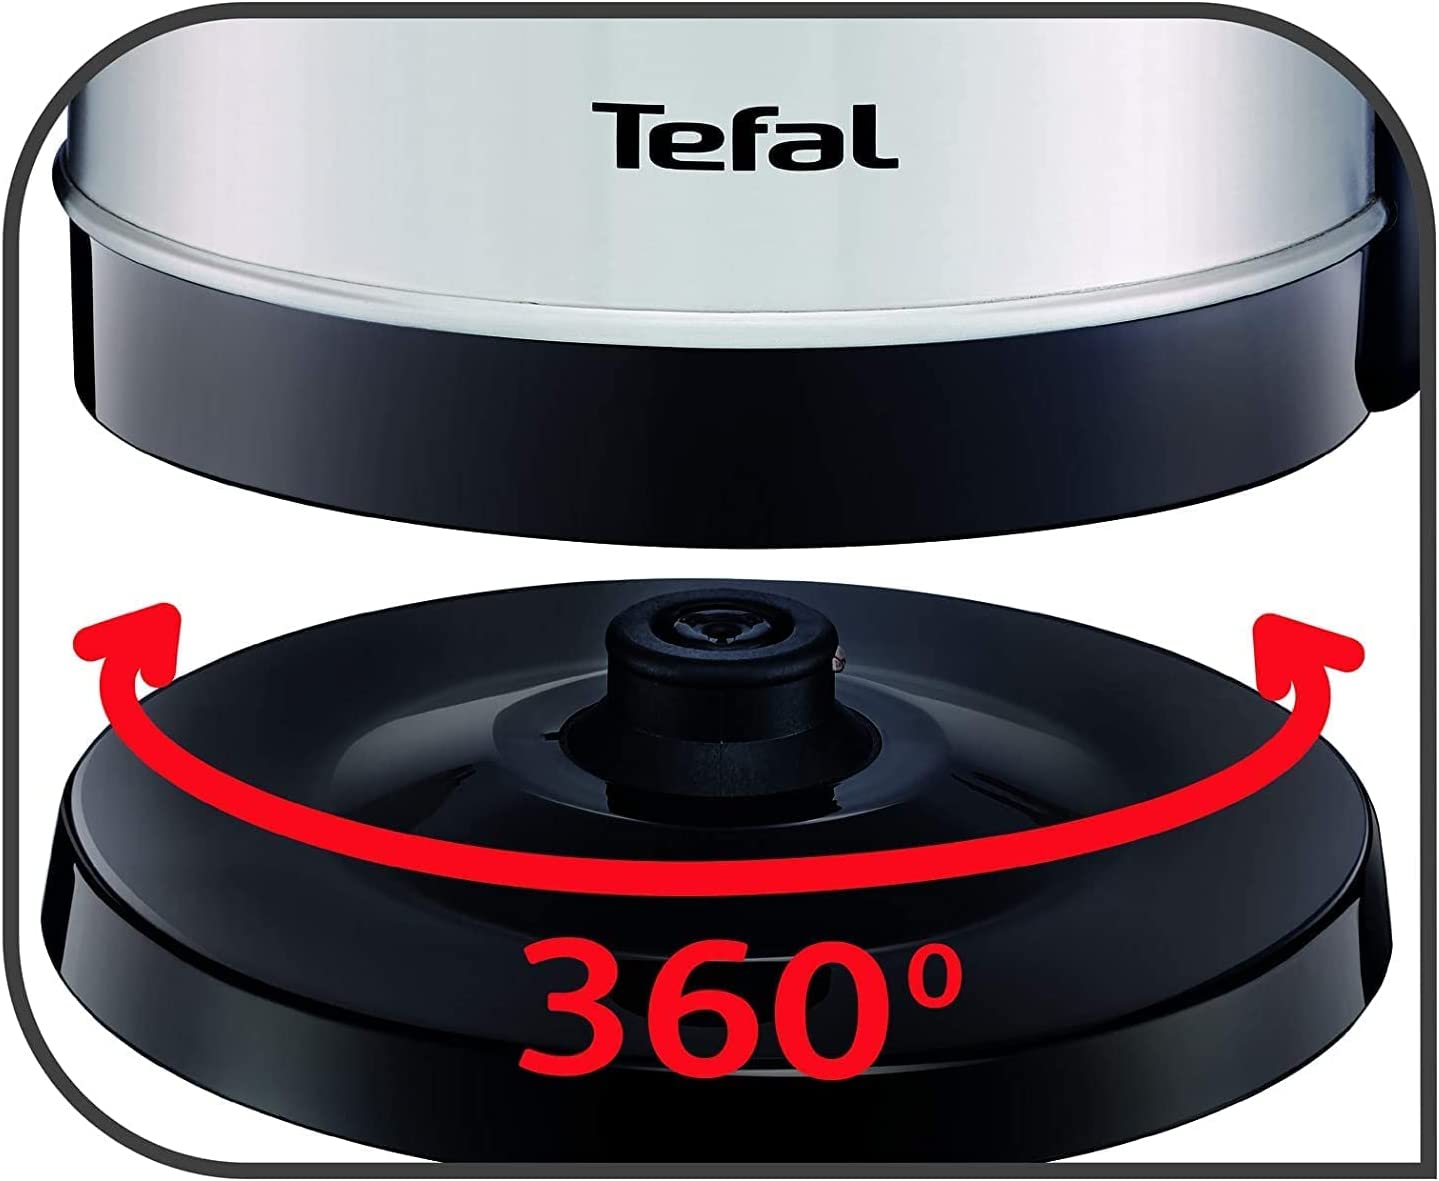 Tefal Electric Kettle 1.7 Litre - Stainless Steel